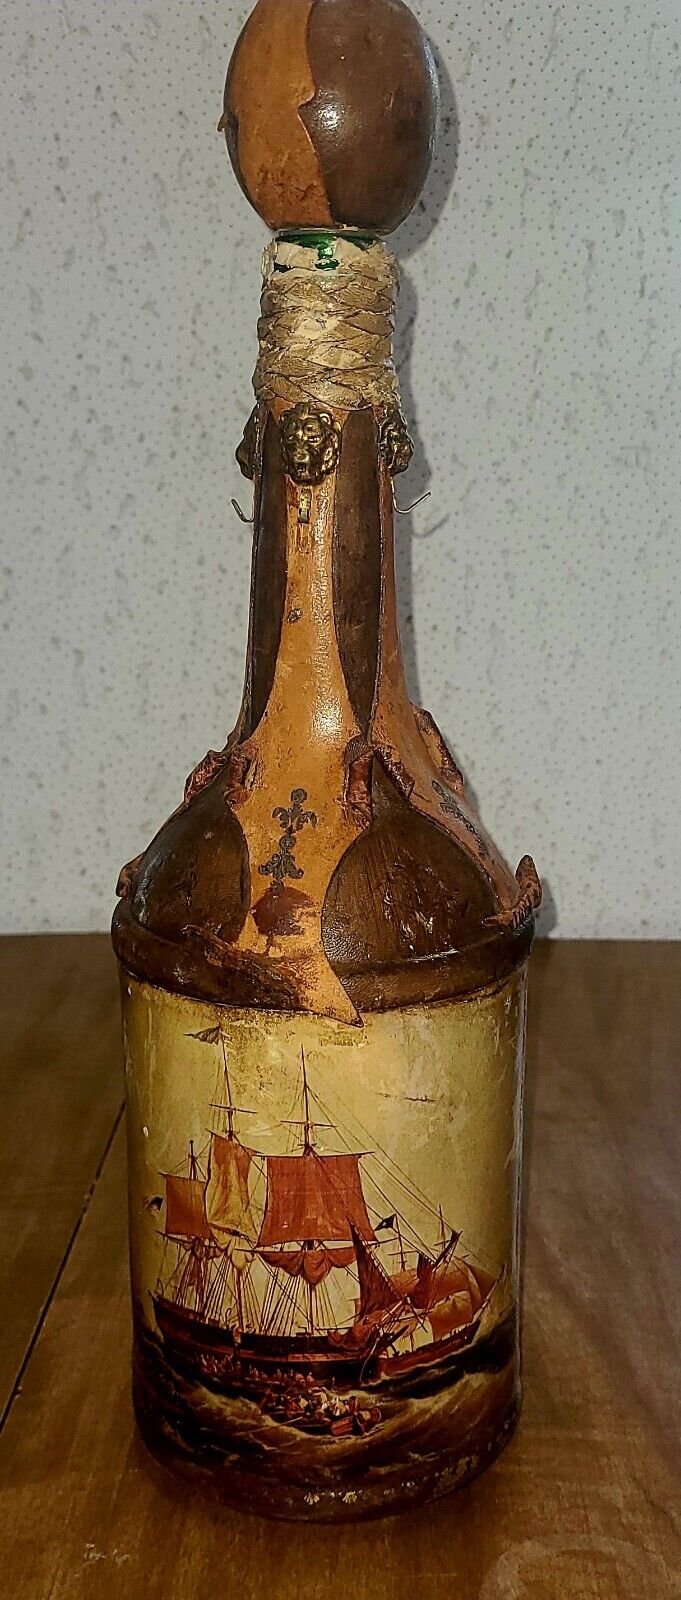 Antique LEATHER WRAPPED DECANTER BOTTLE Italy NAUTICAL Sailing Ships Pirate